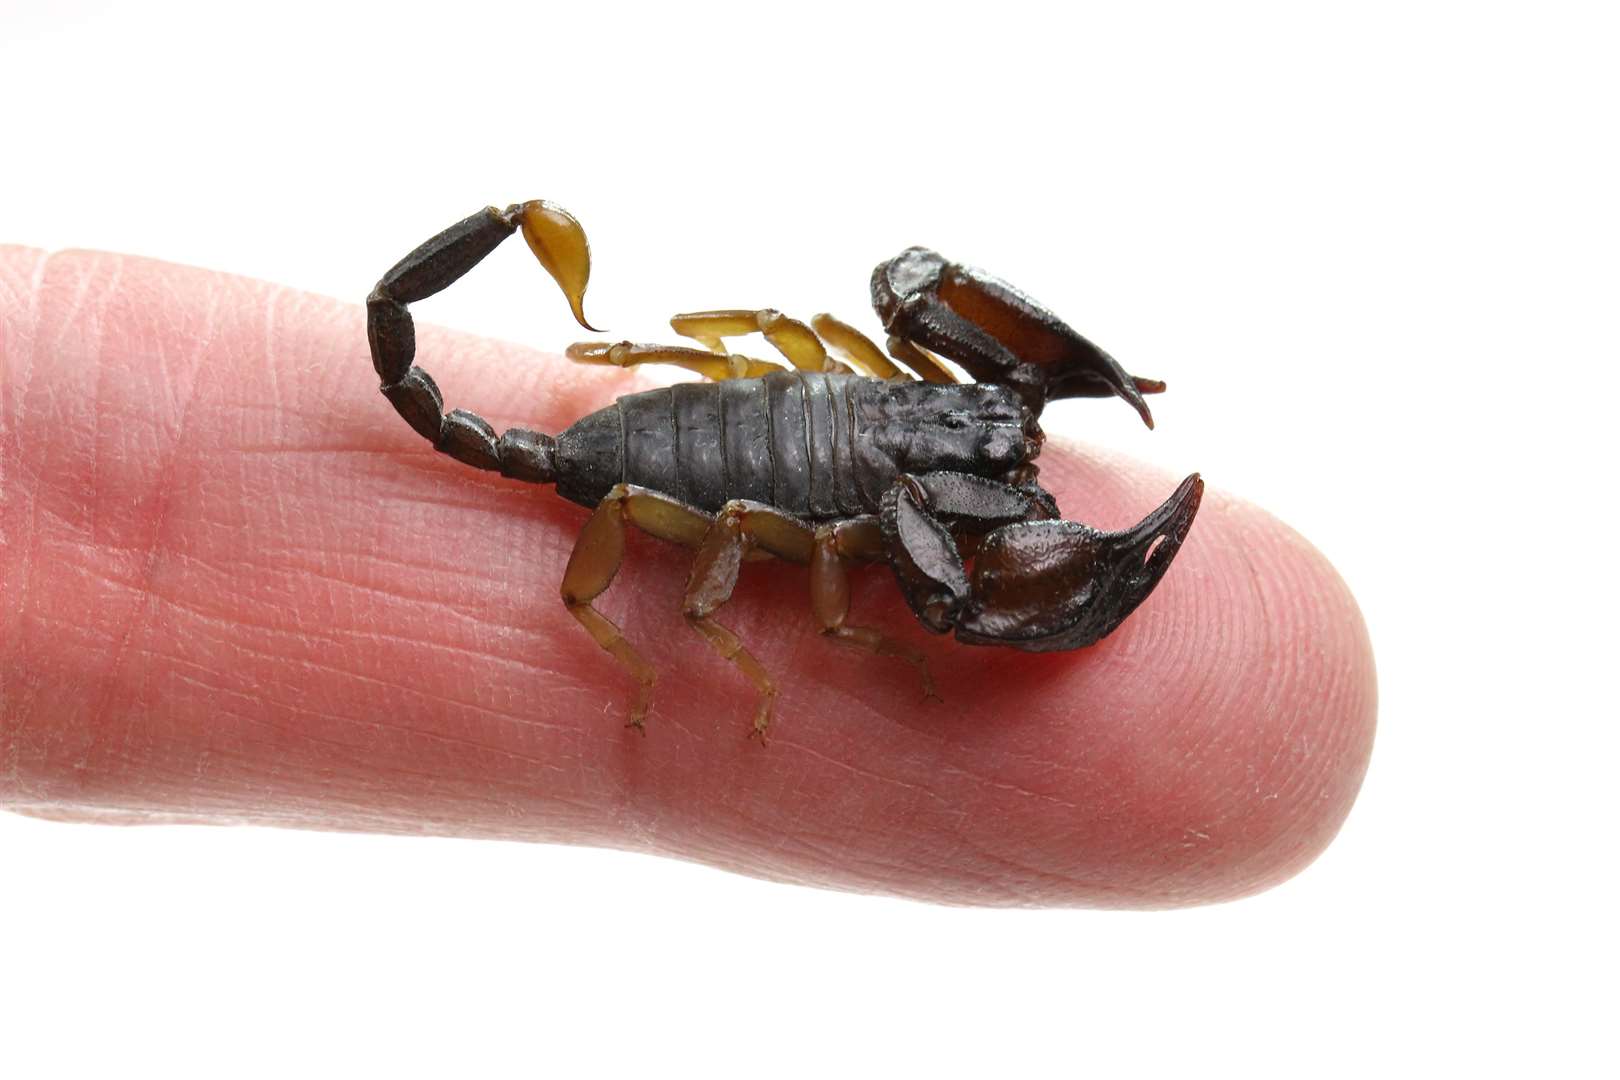 Tiny Yellow Tailed Scorpion from Blue Town, Sheerness, on a fingertip. Picture: Jason Steel www.jason-steel.co.uk